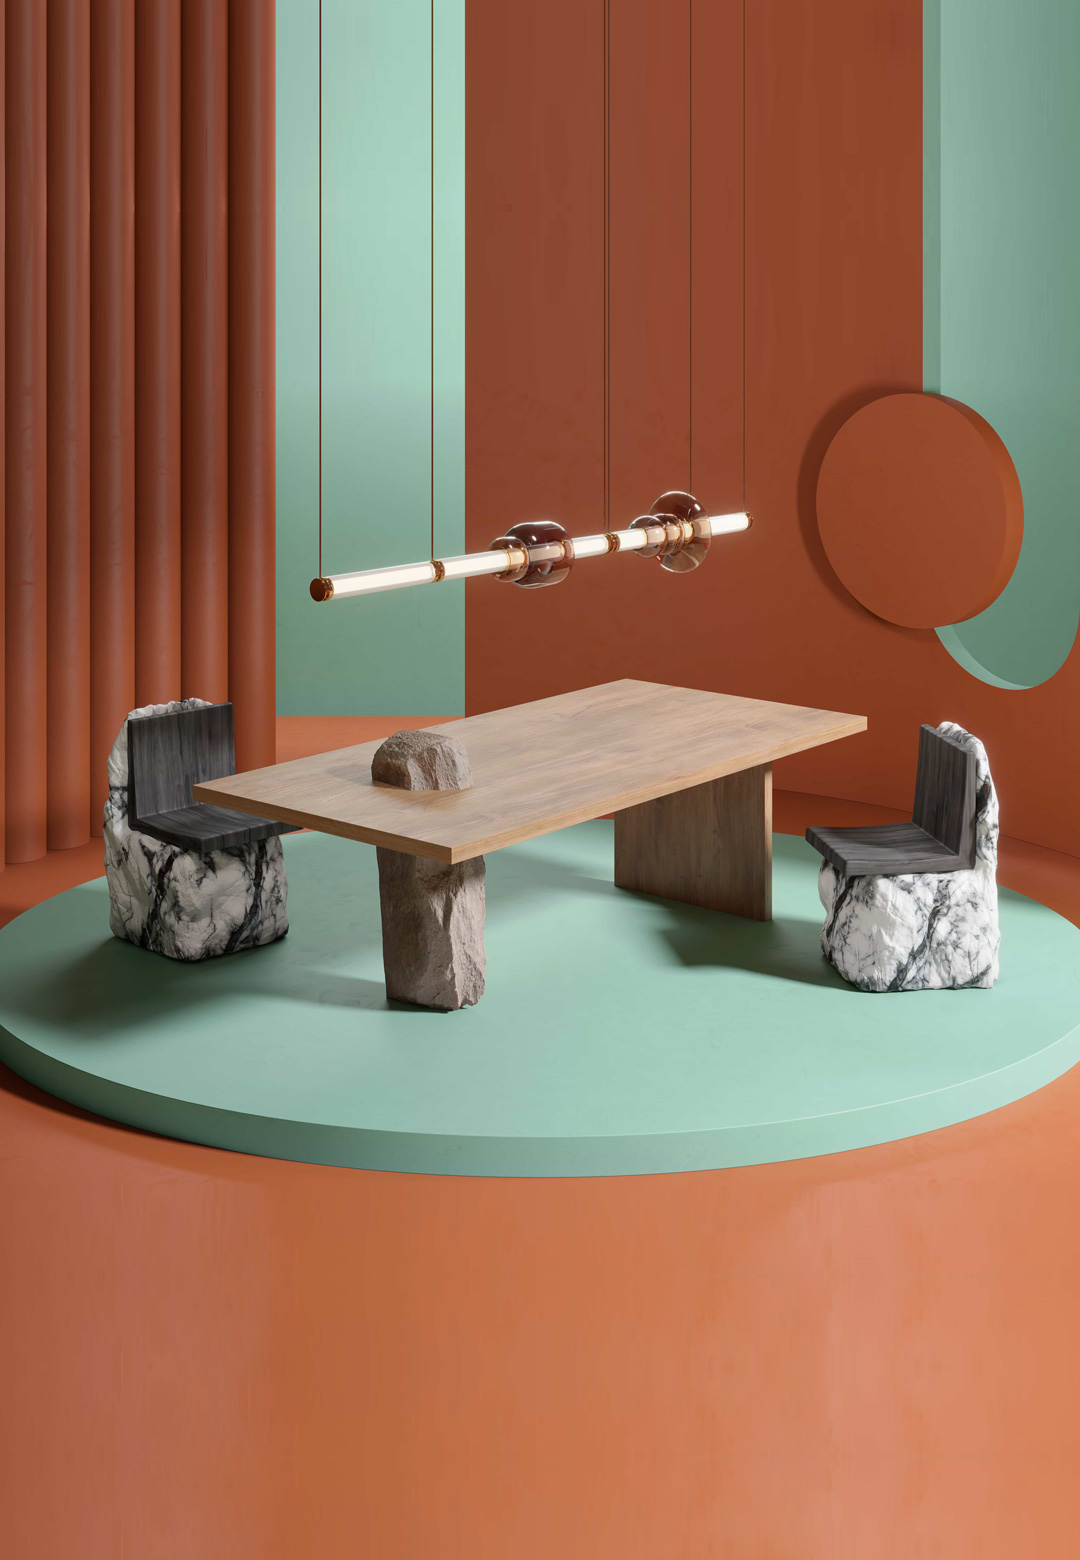 Bea Pernia’s Atus Collection is an organic play in stone and wood